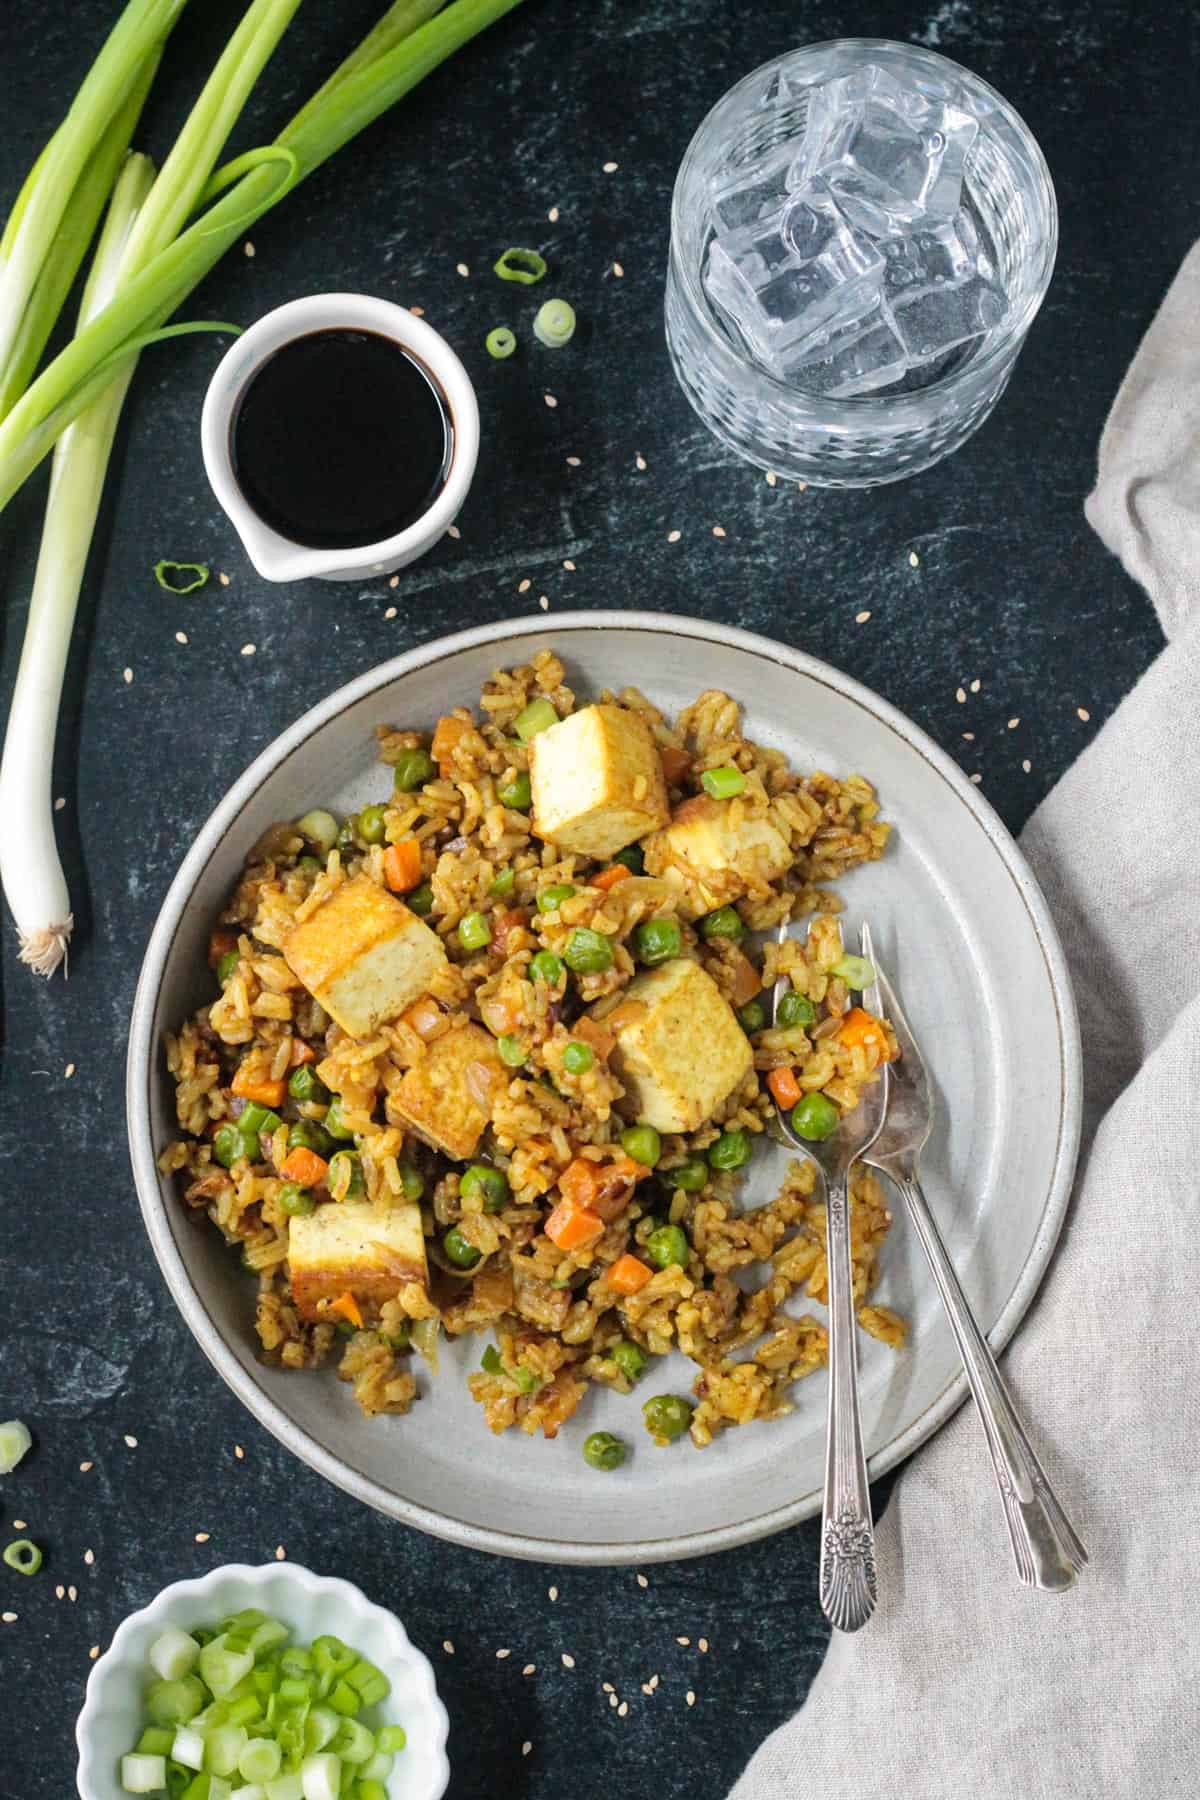 Curry fried rice with peas and carrots on a plate with two forks.